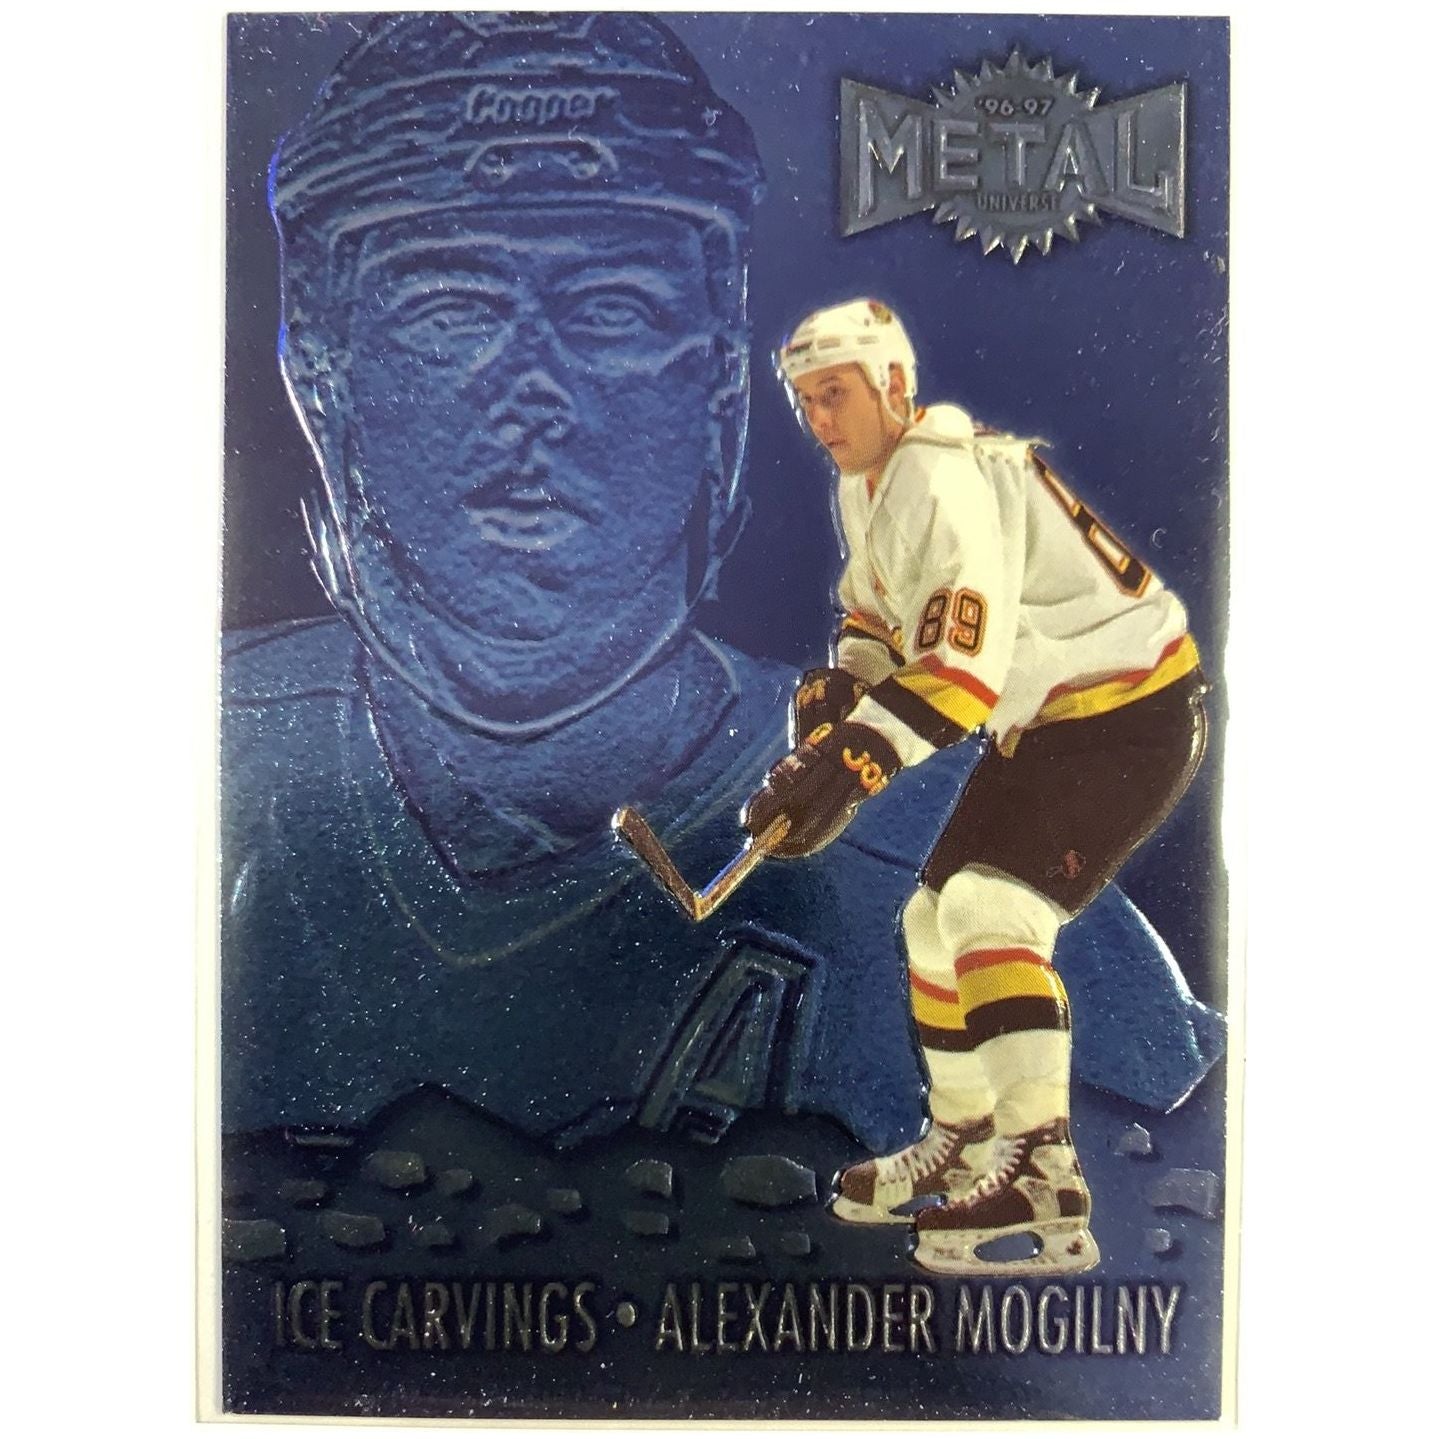  1996-97 Fleer Skybox Metal Universe Alexander Mogilny Ice Carvings  Local Legends Cards & Collectibles